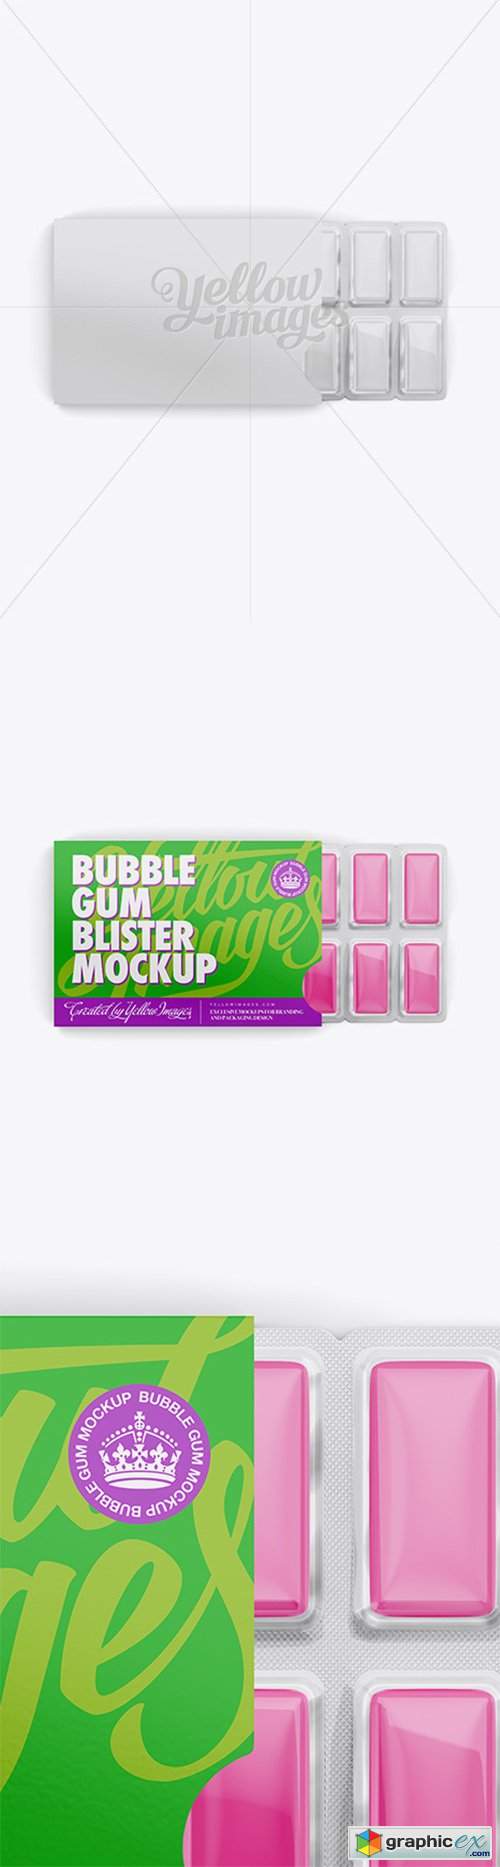 Chewing Gum in Blister Package Mockup - Top